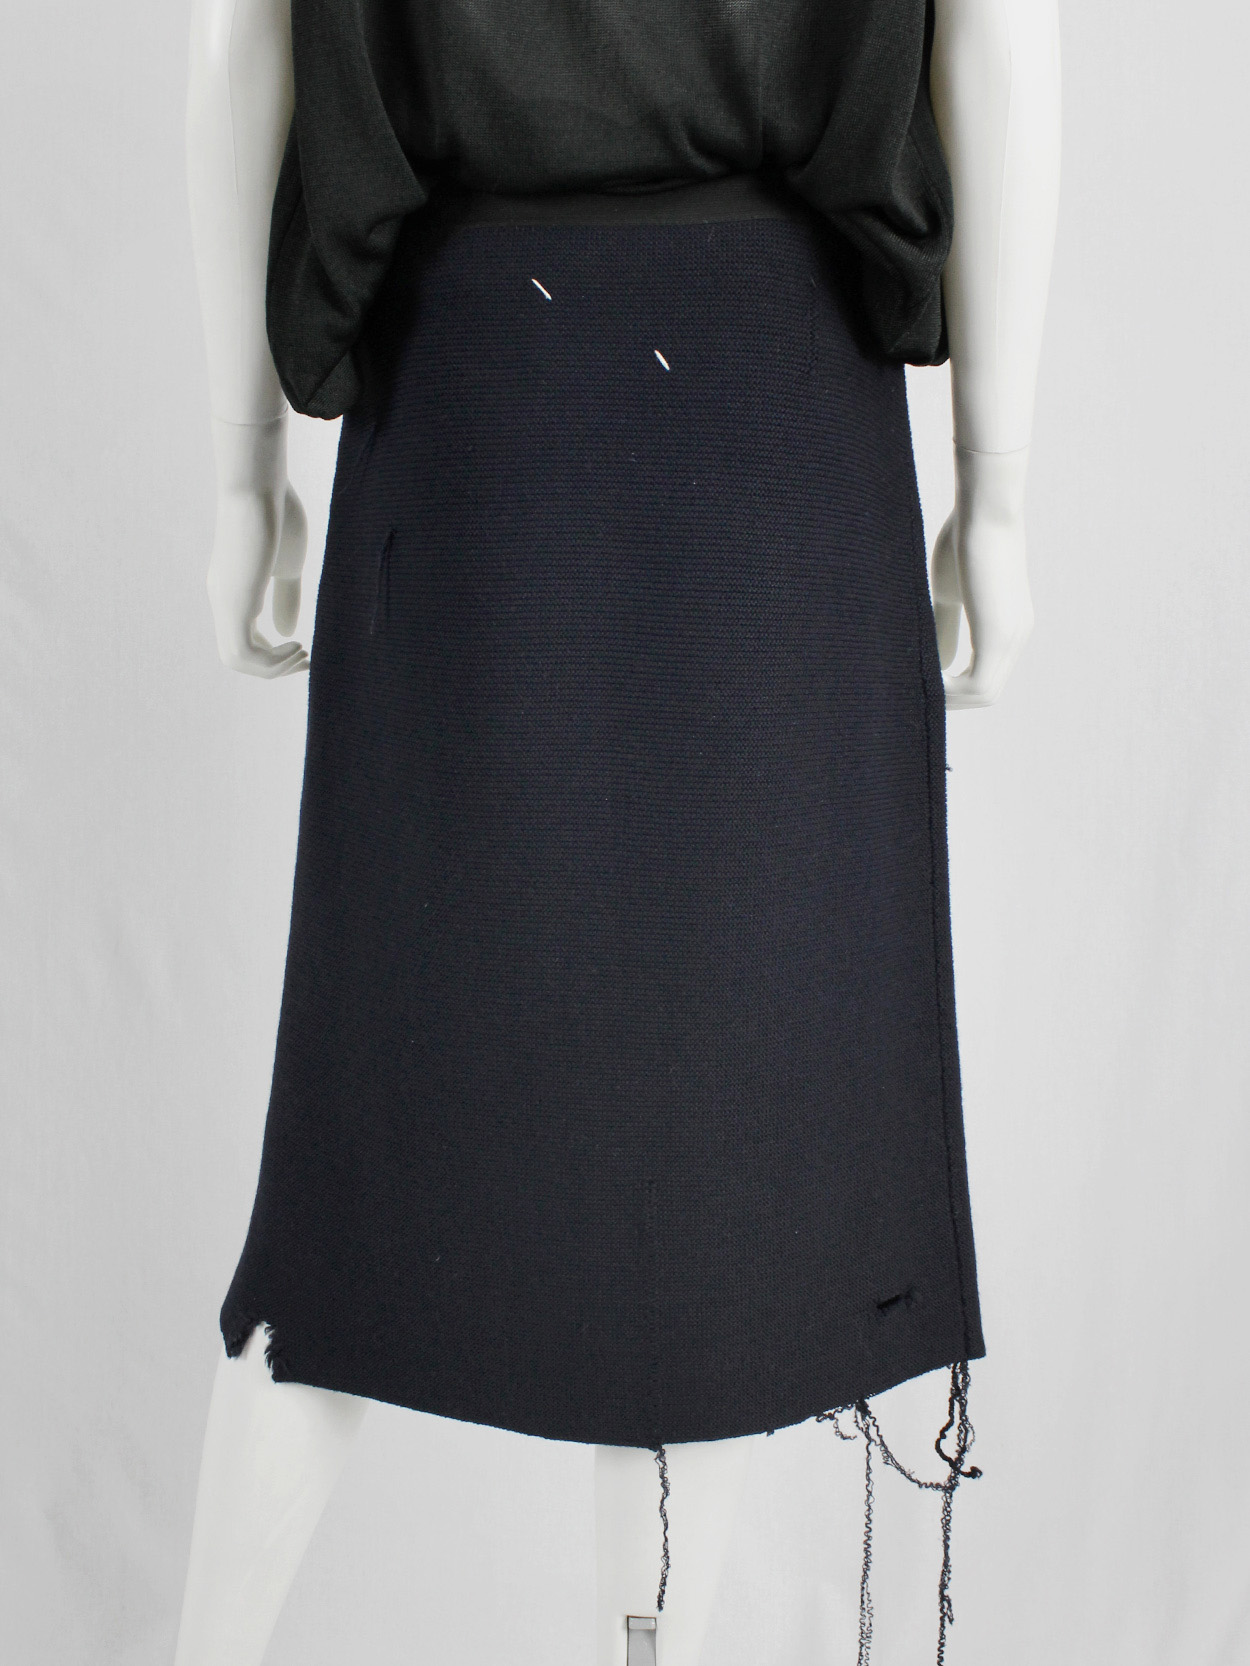 vaniitas Maison Martin Margiela blue destroyed skirt with holes and loose threads fall 2000 5155